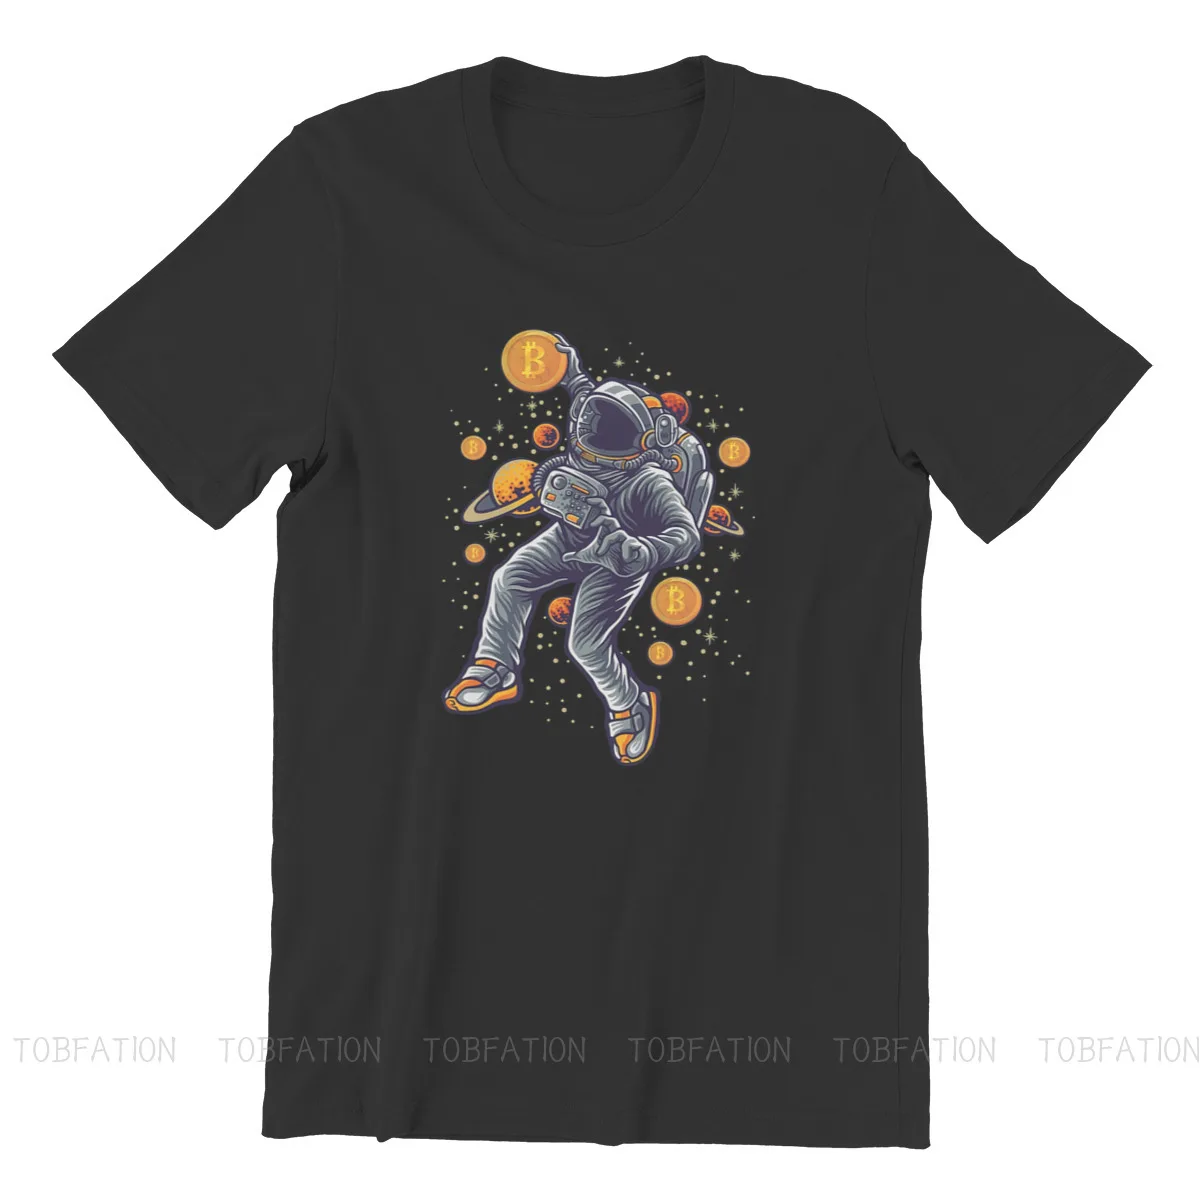 

BTC Crypto Basketball in Space TShirt For Men Bitcoin Cryptocurrency Miners Meme Clothing Fashion T Shirt Soft Print Loose